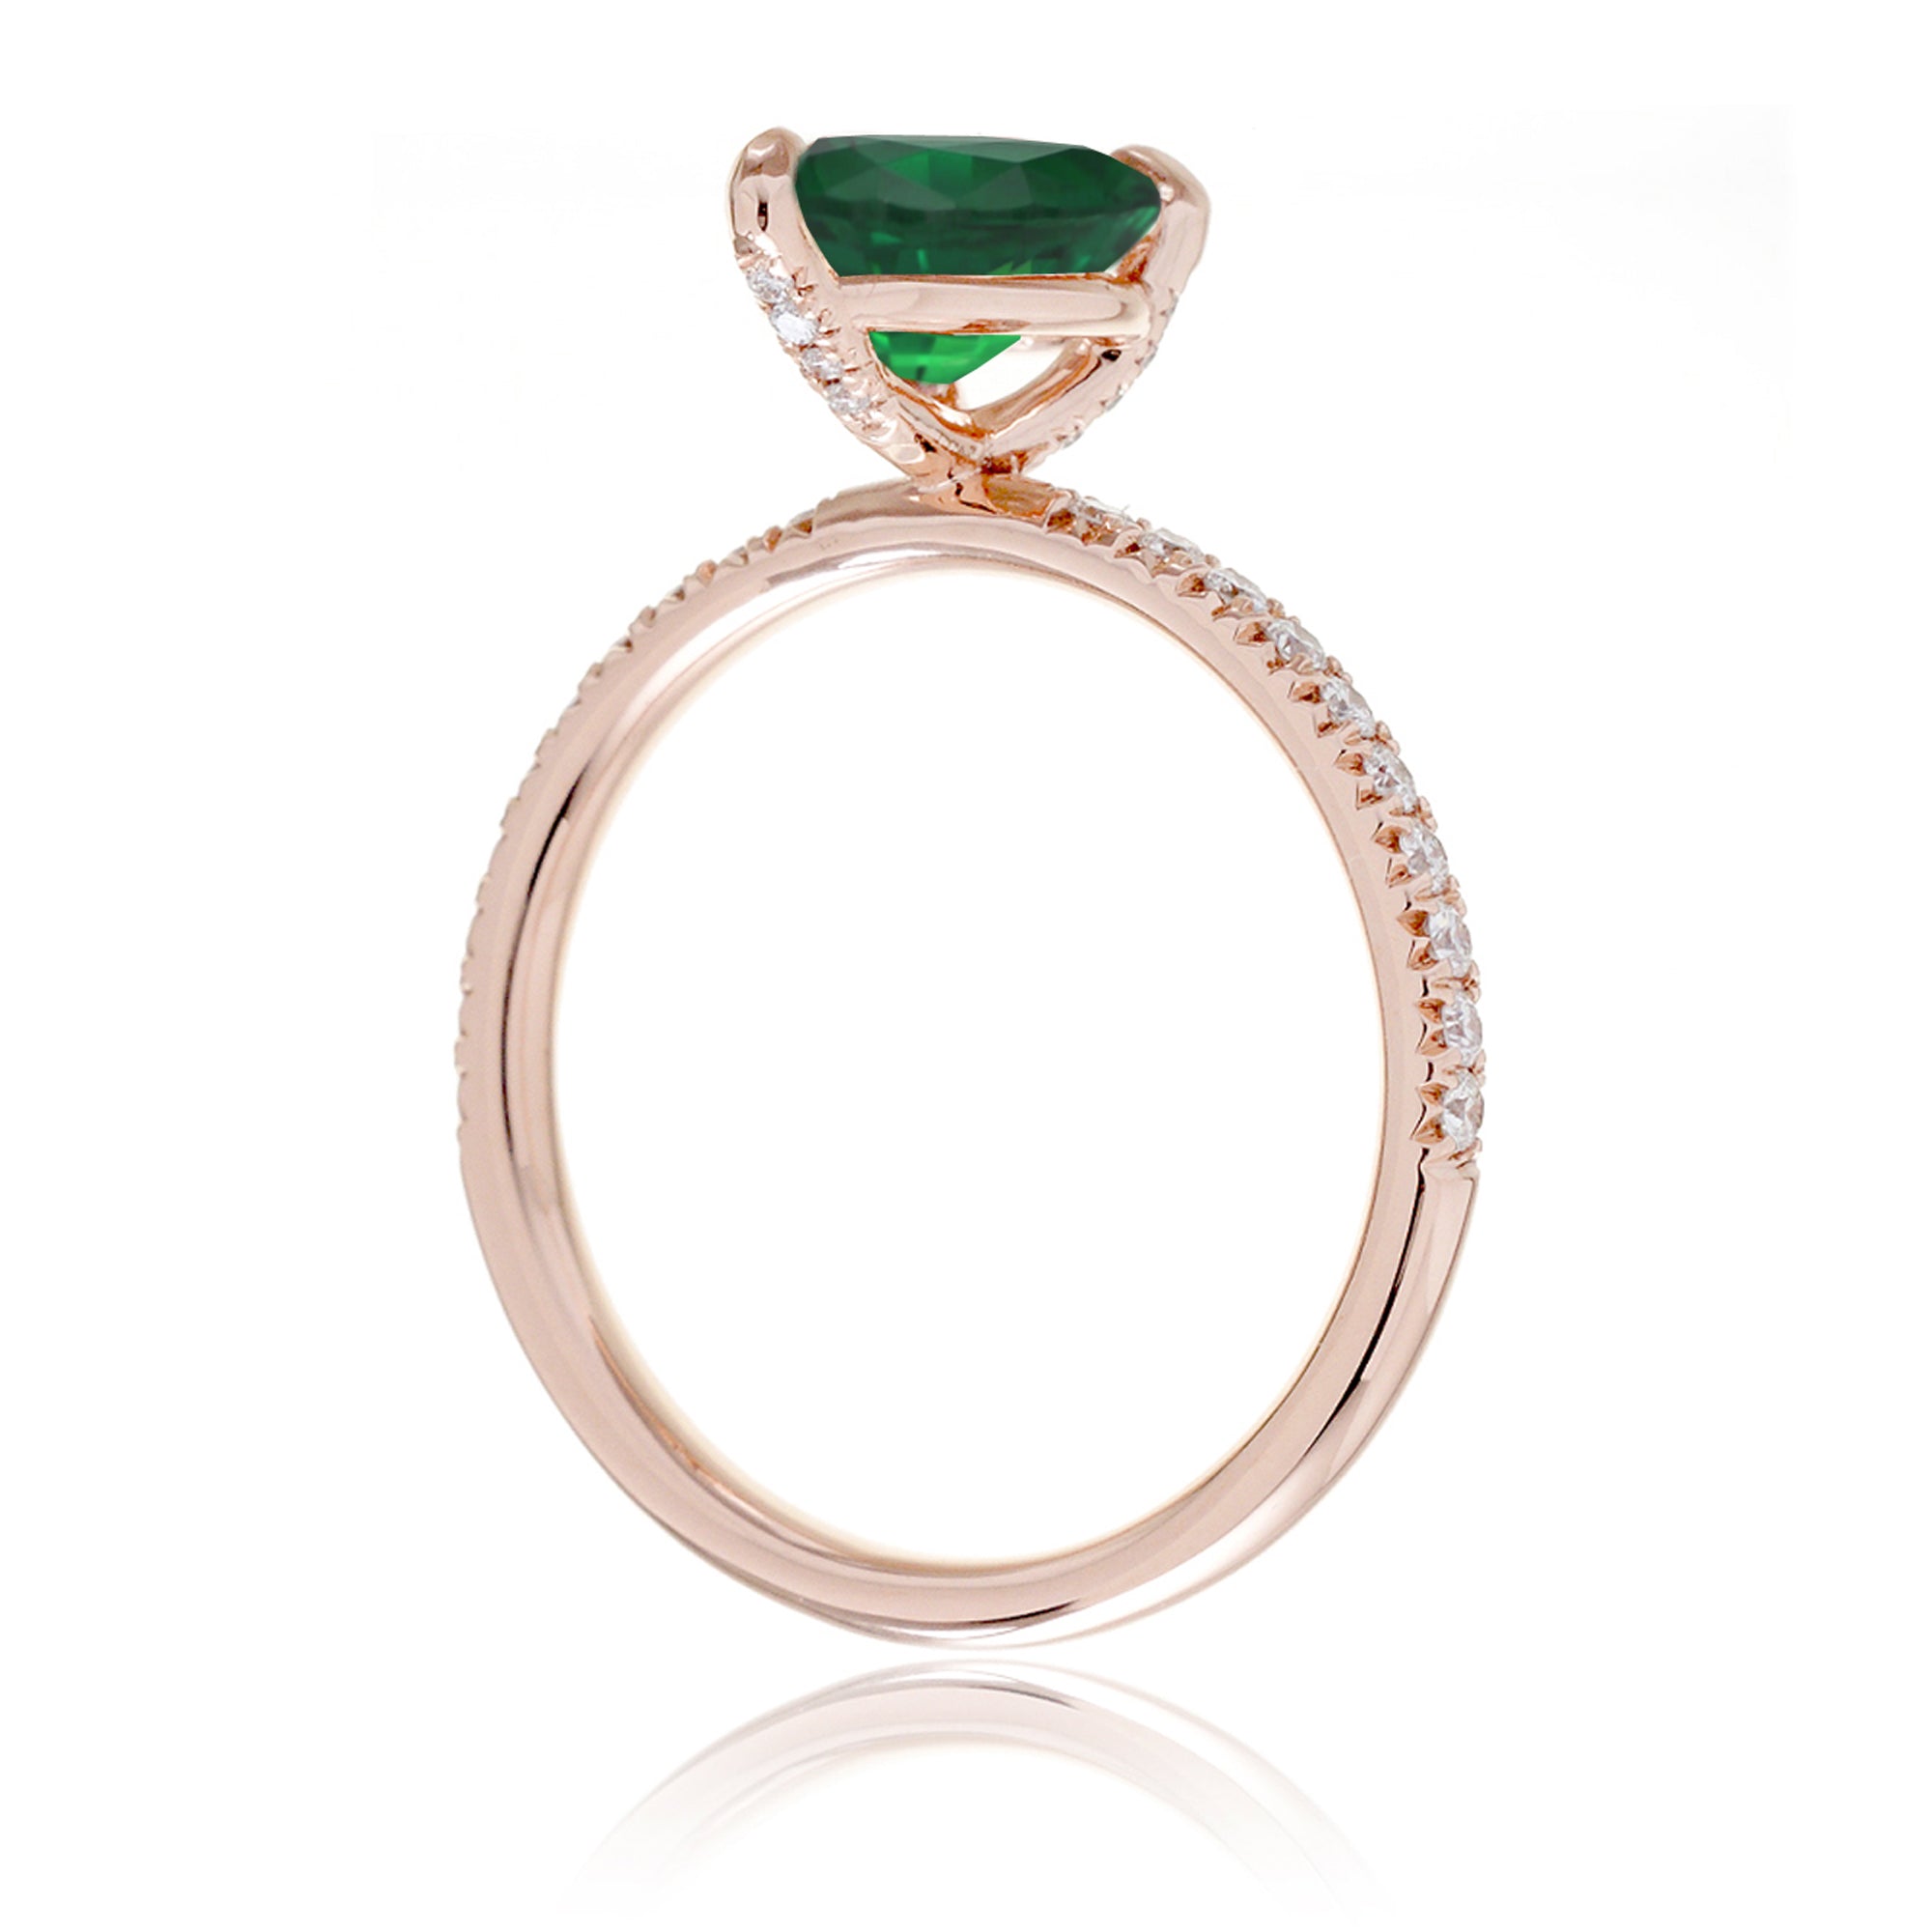 Pear green emerald diamond band engagement ring rose gold - the Ava